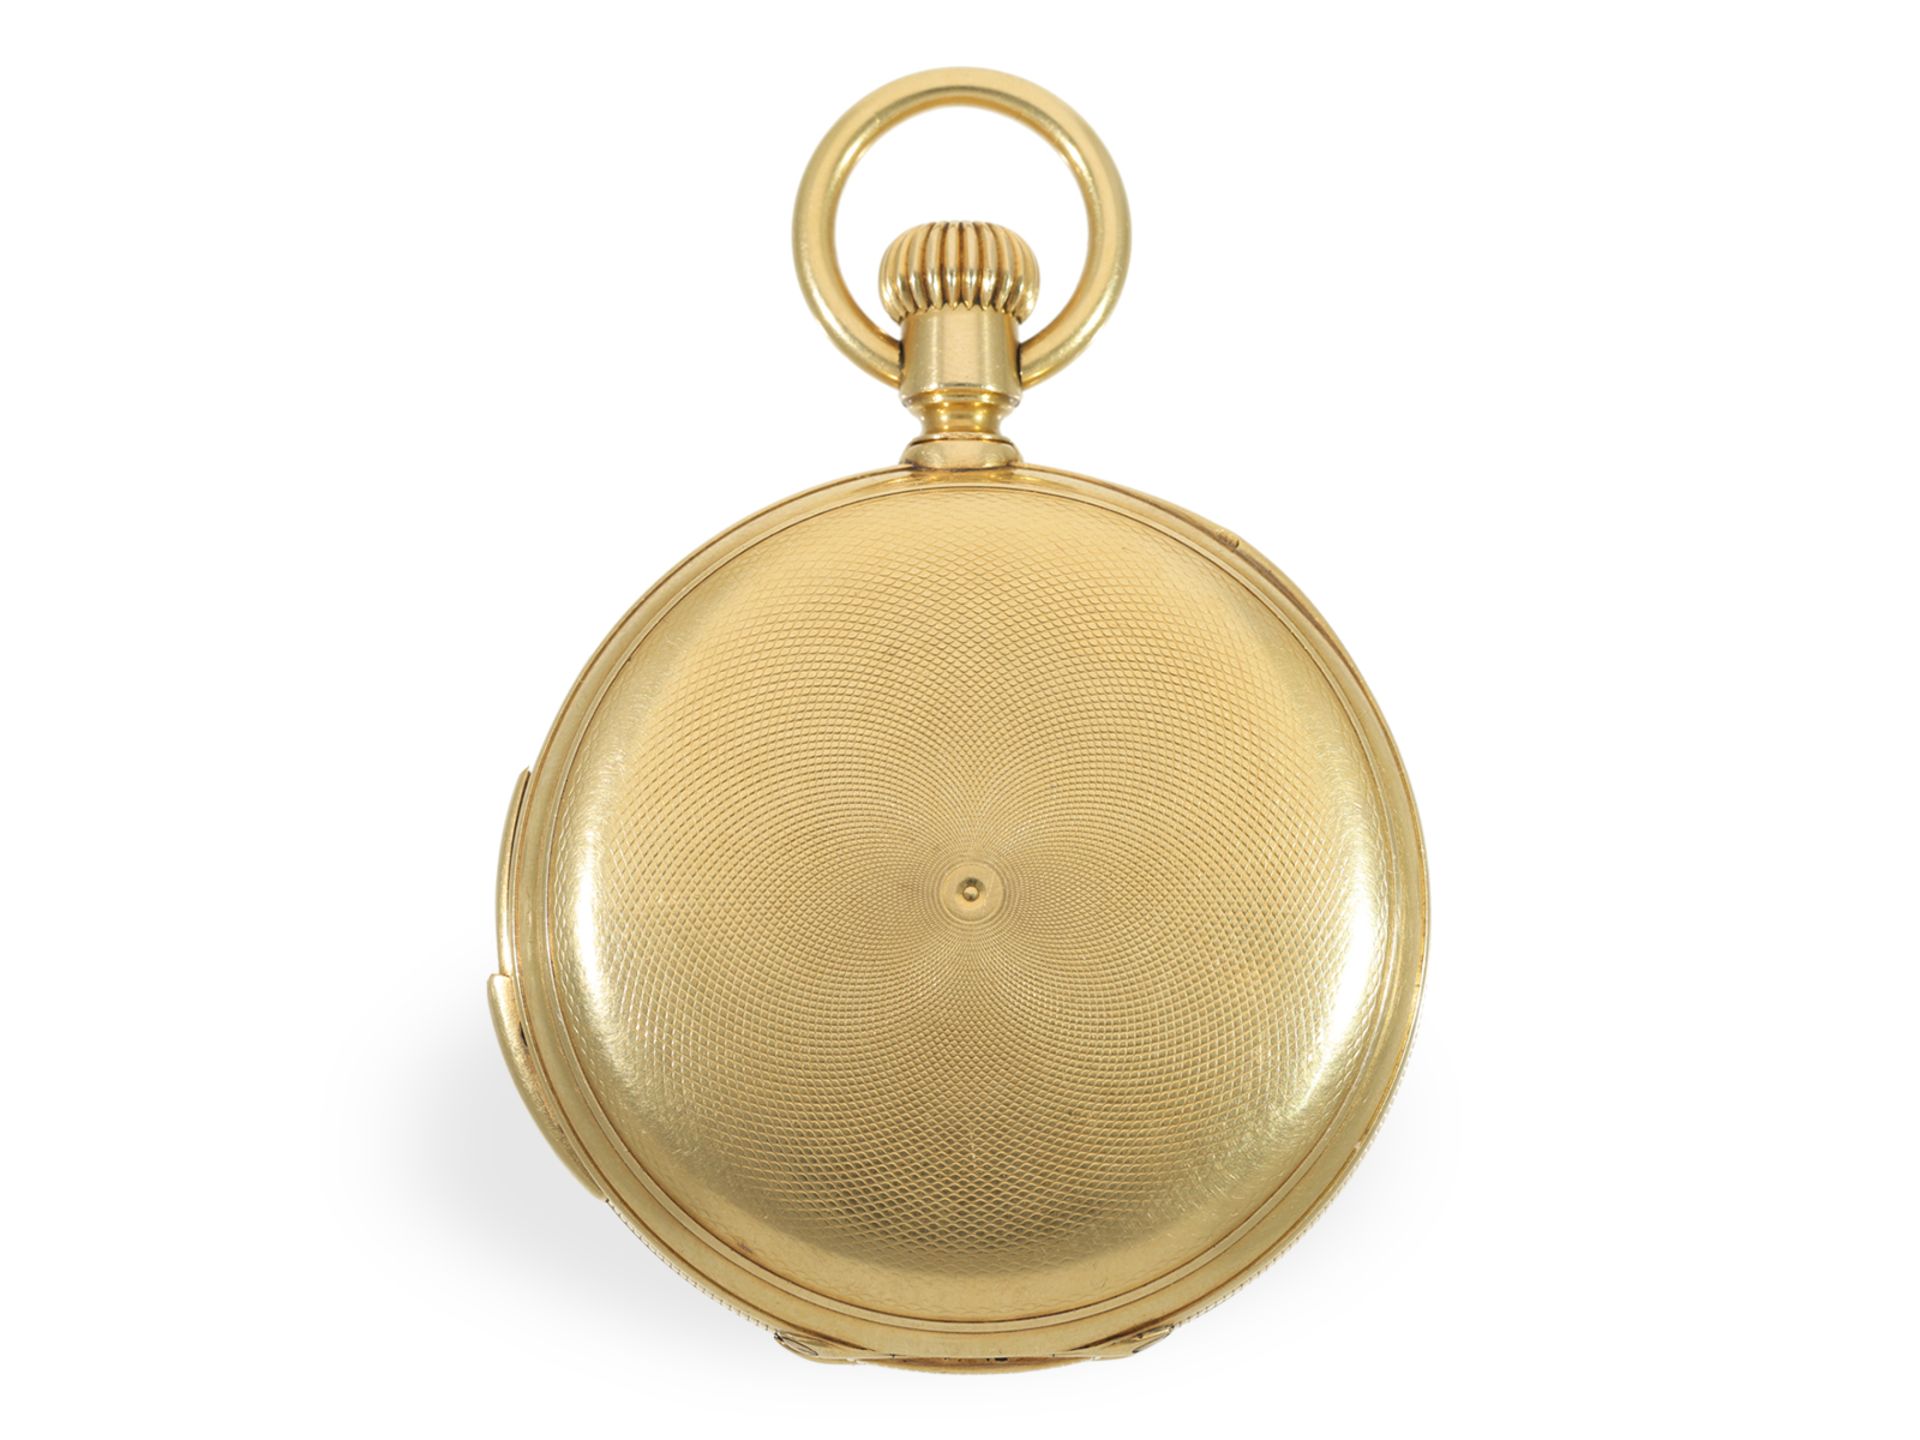 Pocket watch: historically interesting Patek Philippe gold hunting case watch with 5-minute repeater - Image 5 of 7